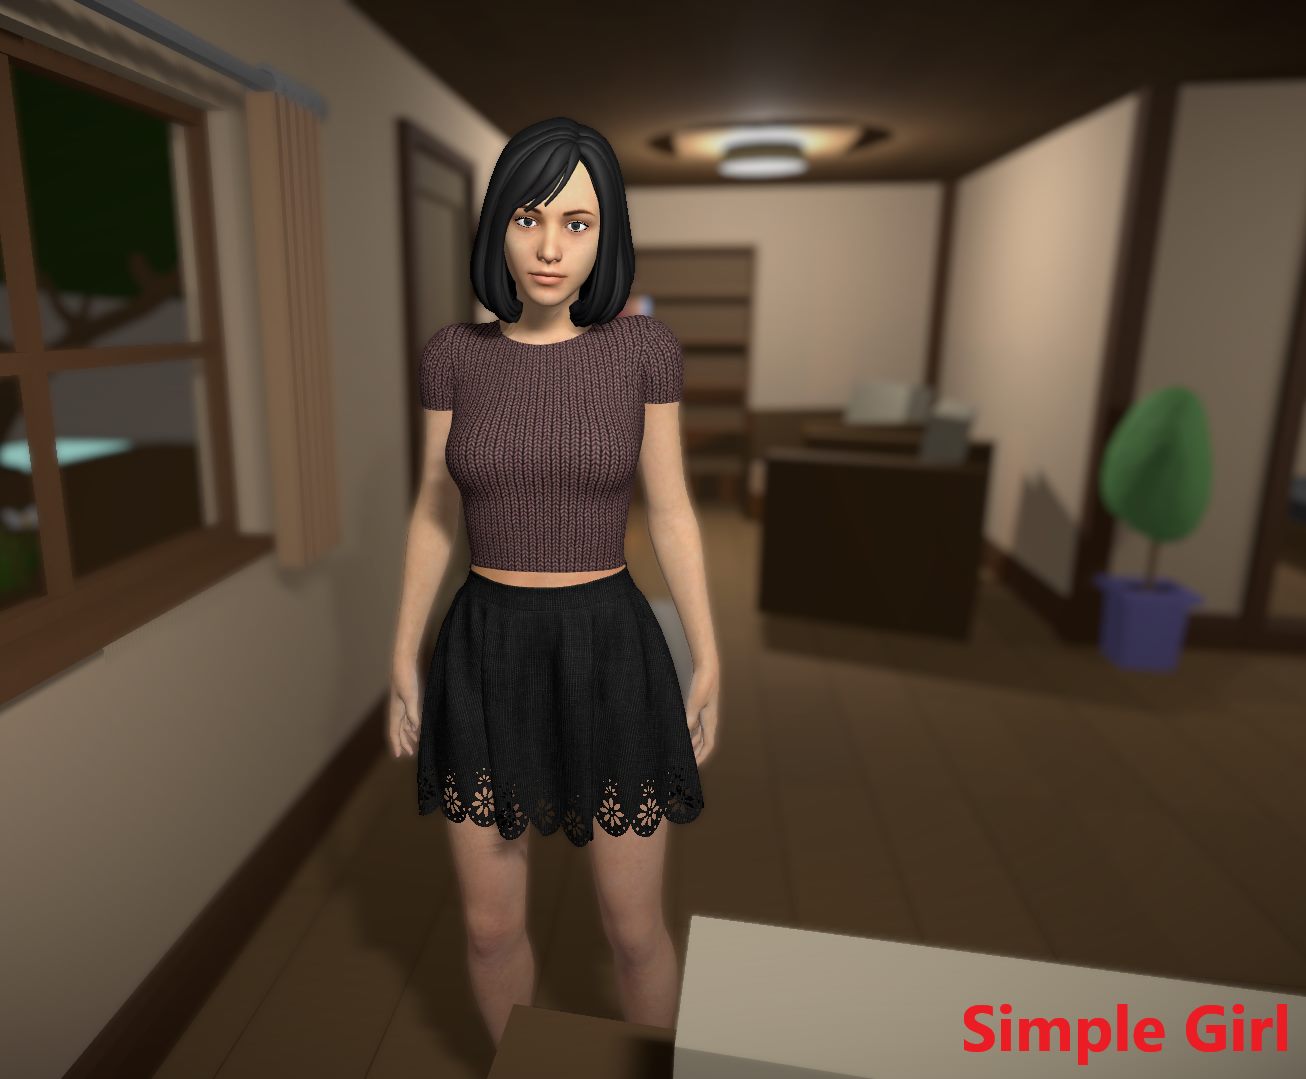 Xxx Simple Porn - Simple Girl Unity Porn Sex Game v.1.39 Download for Windows, Android